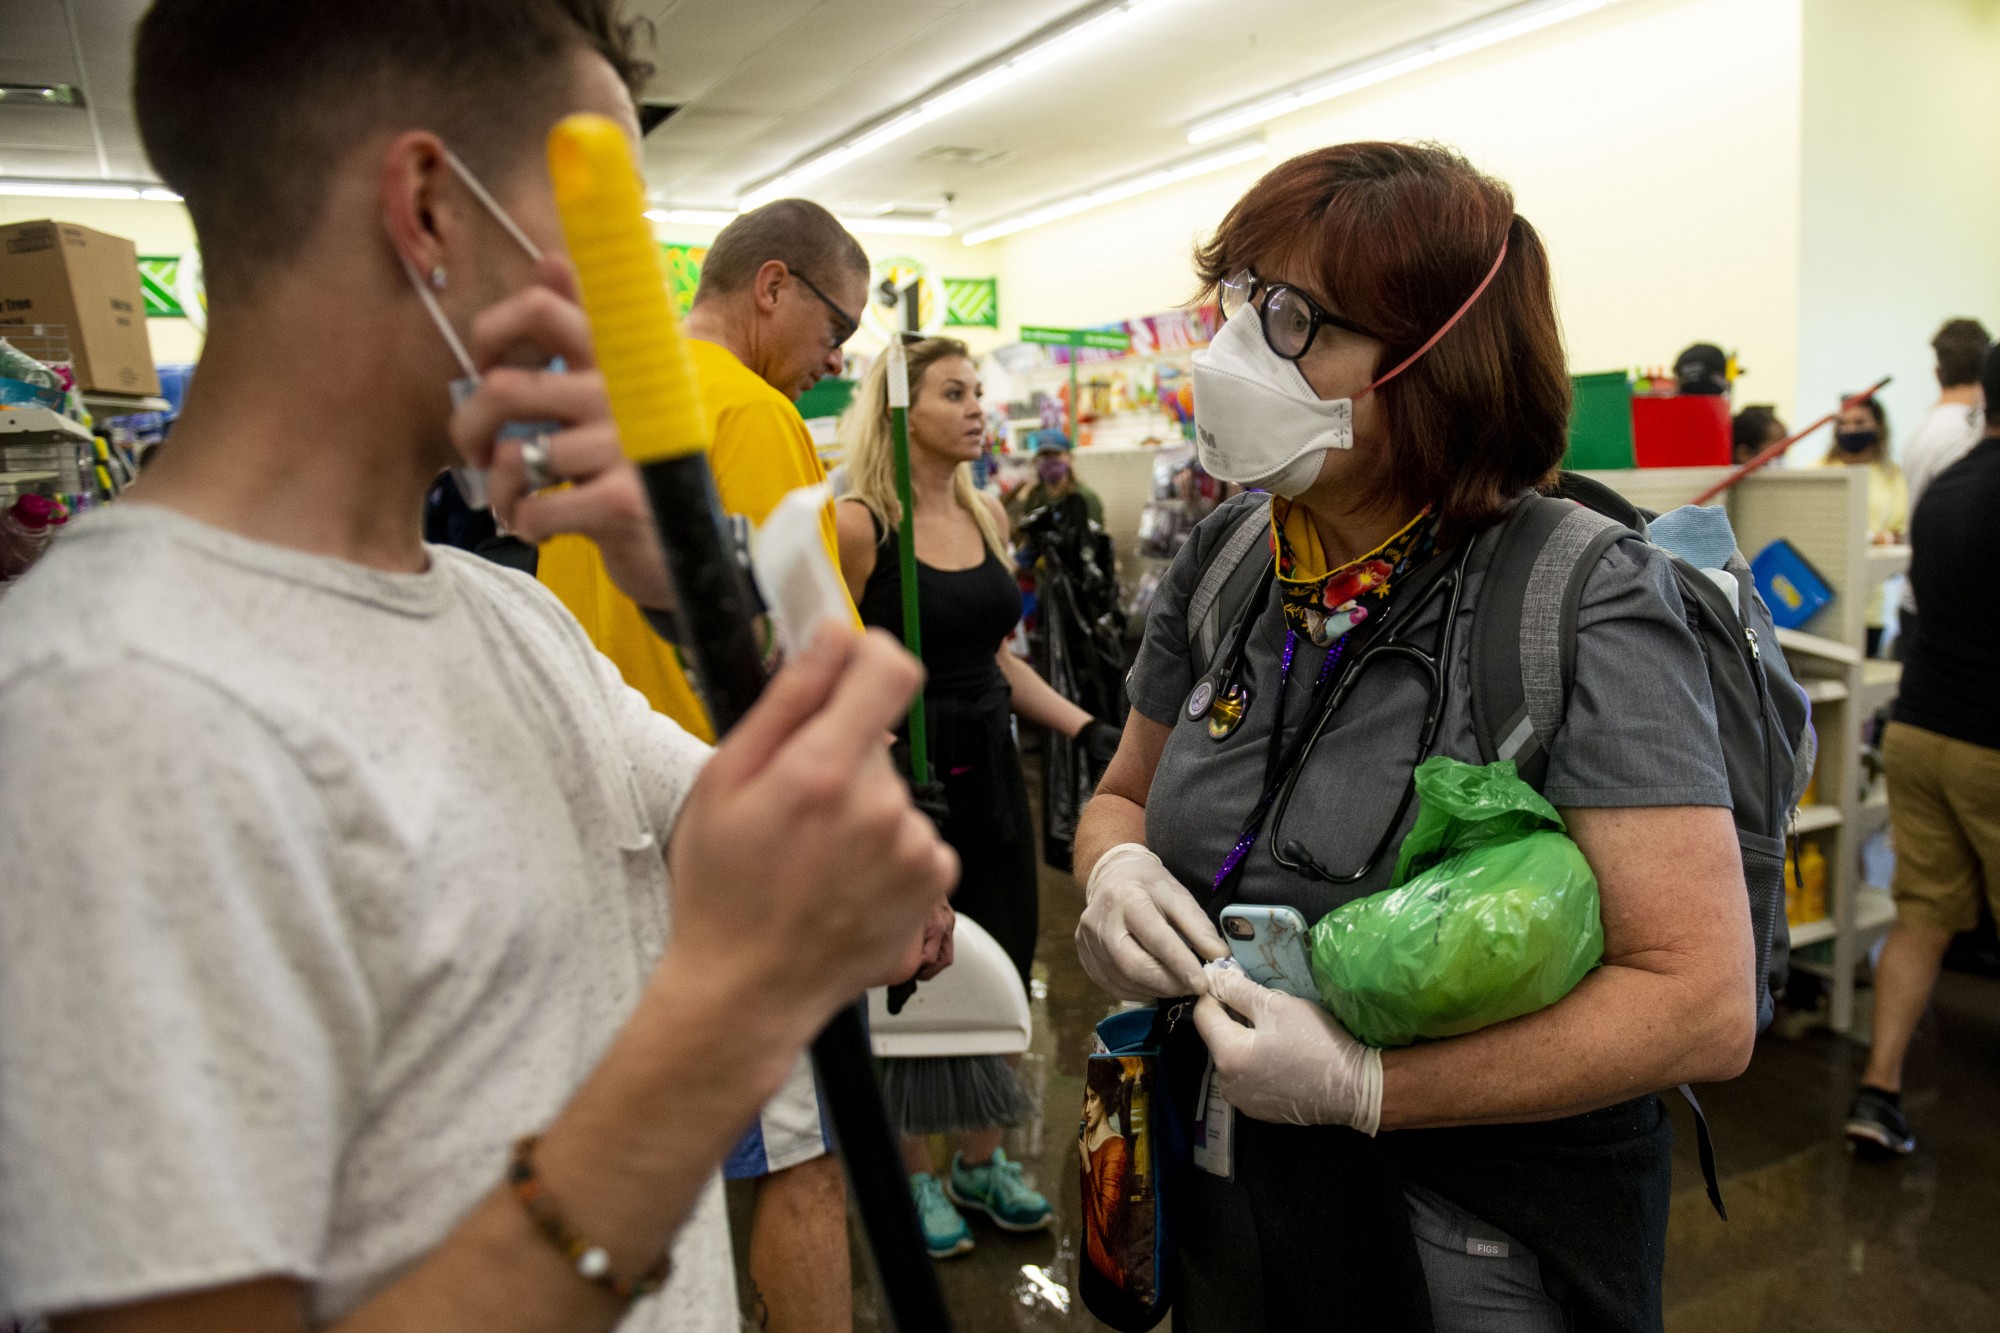 Dr. Vivian Fischer tends to volunteers with Band-Aids, Tylenol and masks inside Dollar Tree near the Minneapolis 5th Police Precinct following another night of riots on Saturday, May 30. Fischer expected to transition from first aid assistance to mental health over the coming weeks as unrest in Minneapolis continues. 